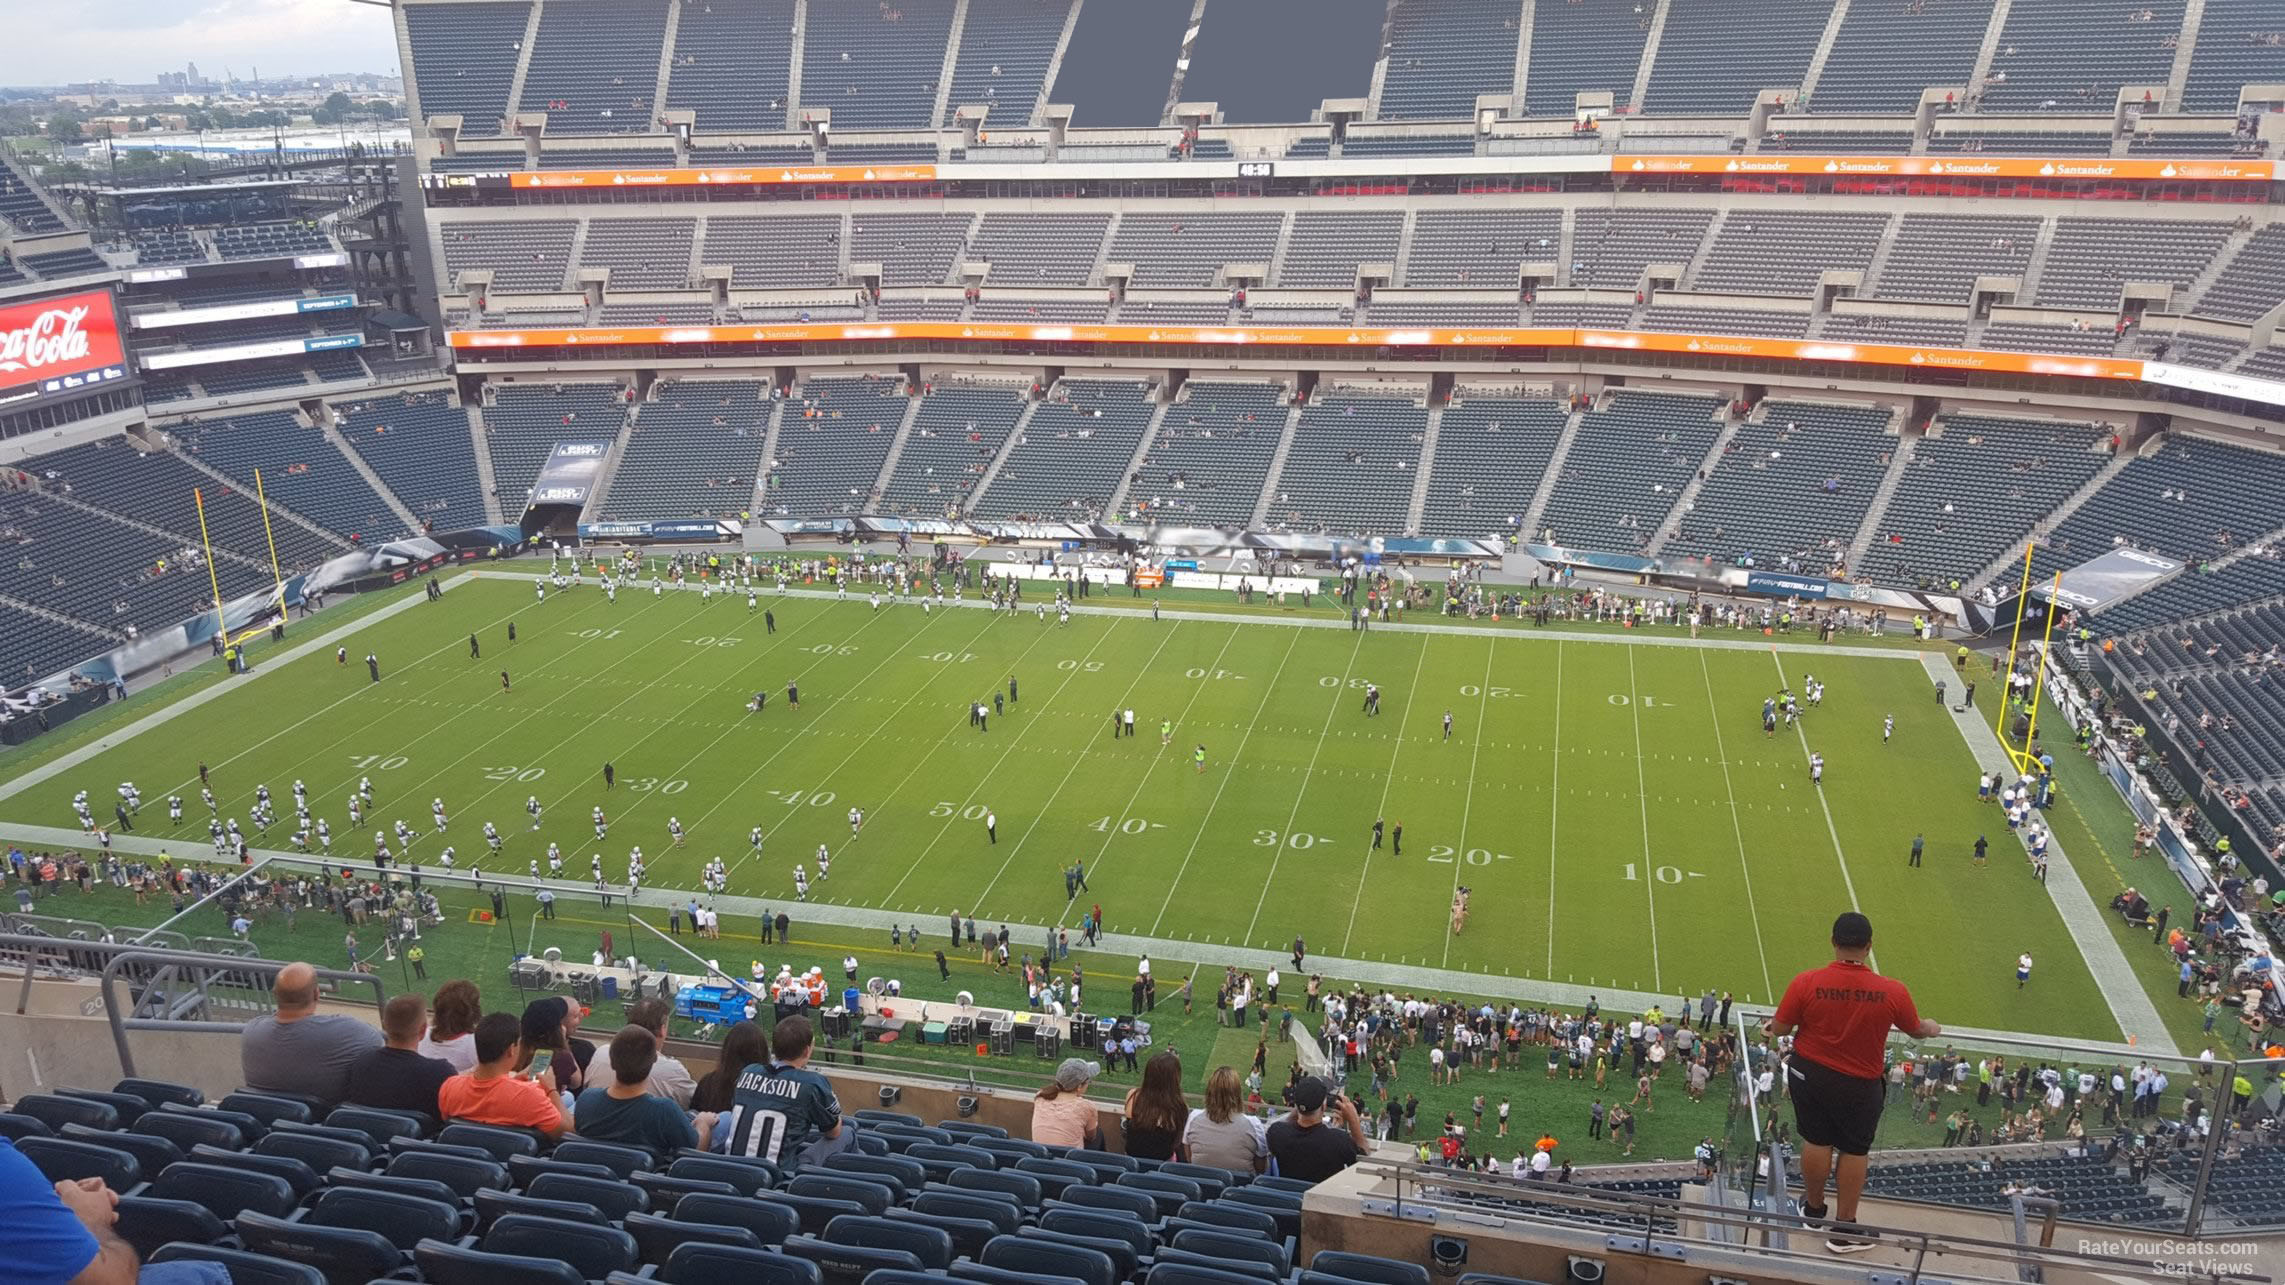 Section 203 at Lincoln Financial Field 